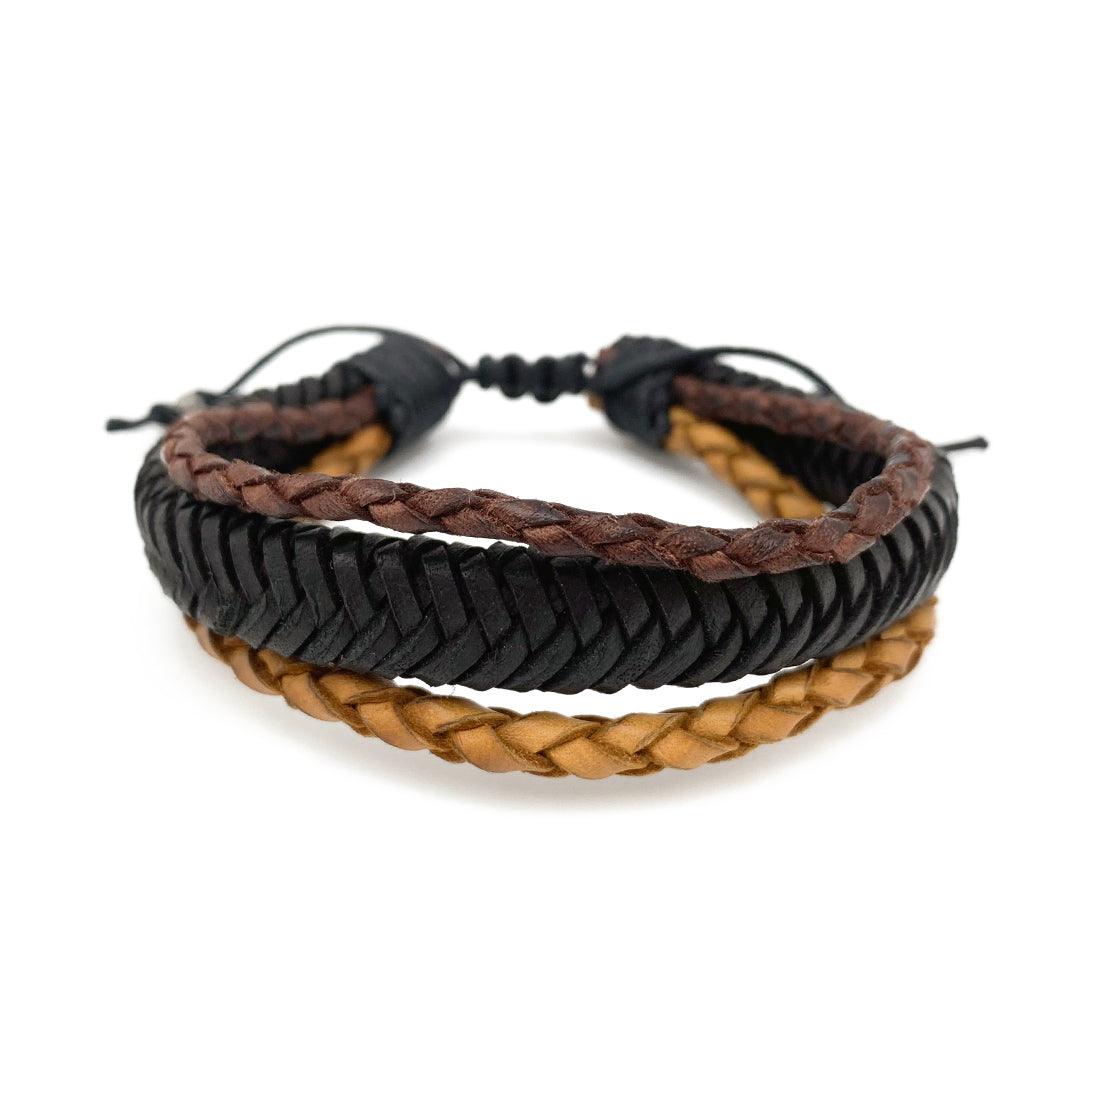 3 strands of braided leather bracelet on a white background.